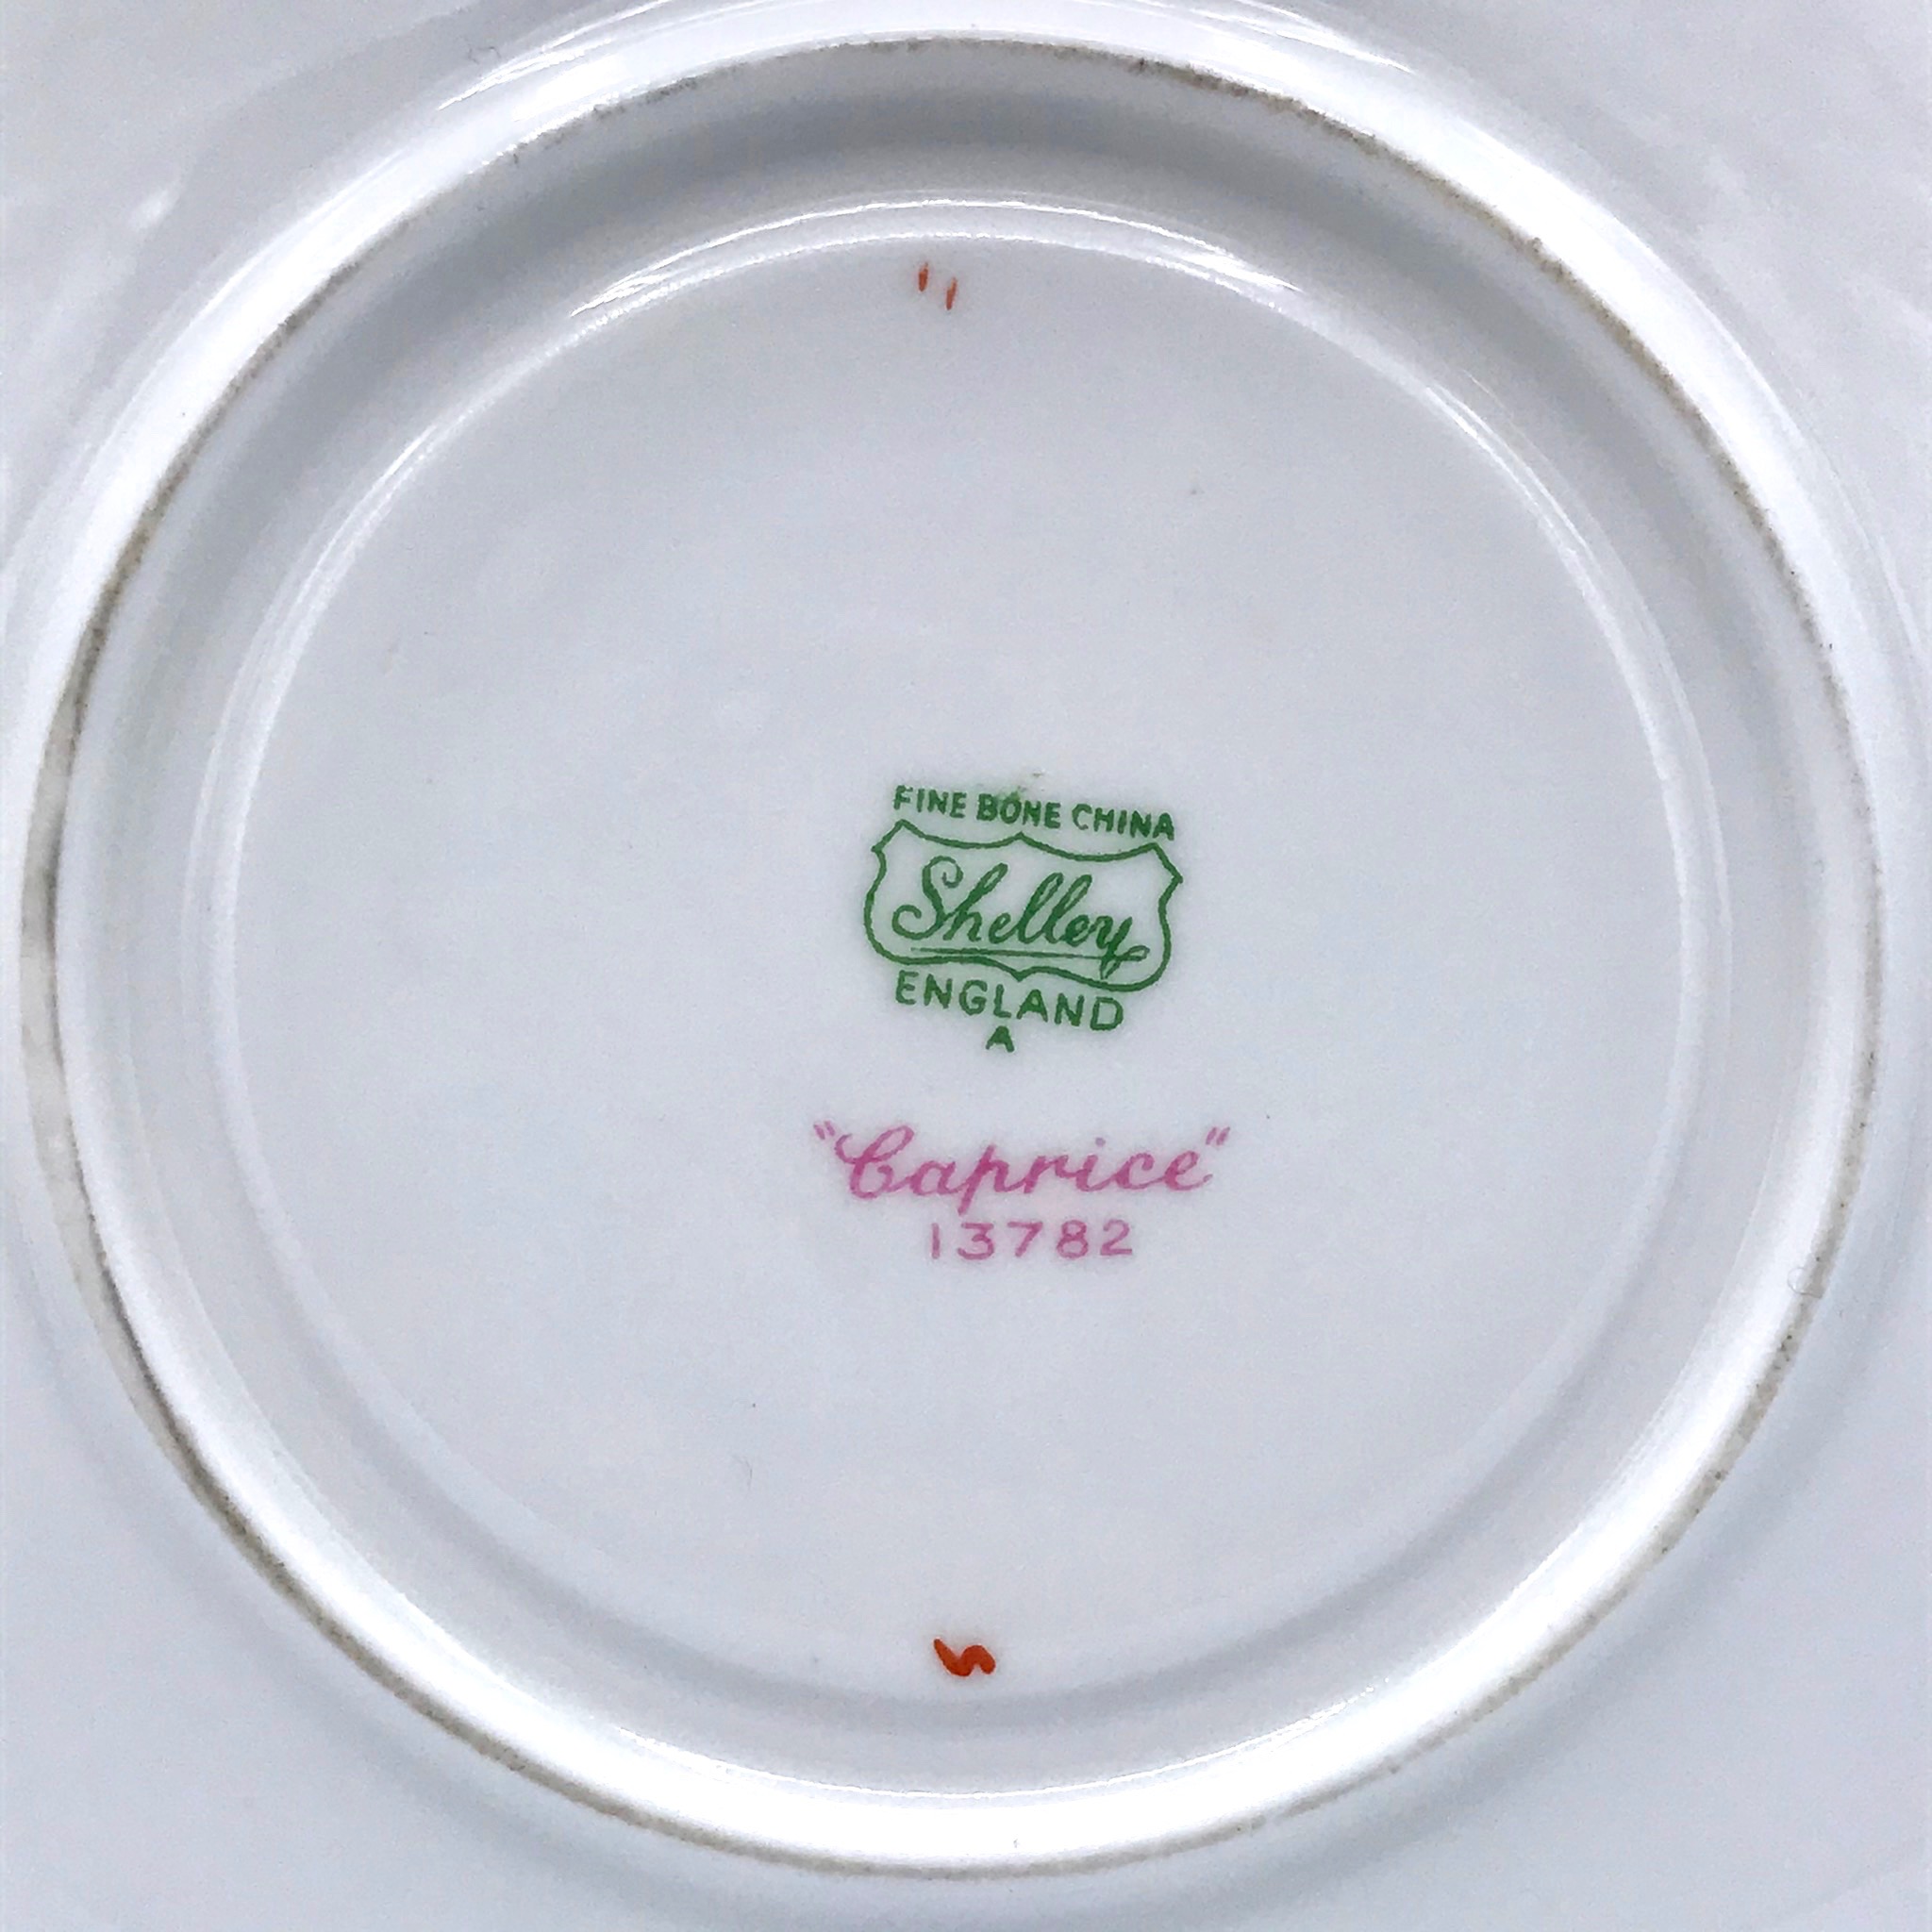 Shelley "Caprice" Cup & Saucer